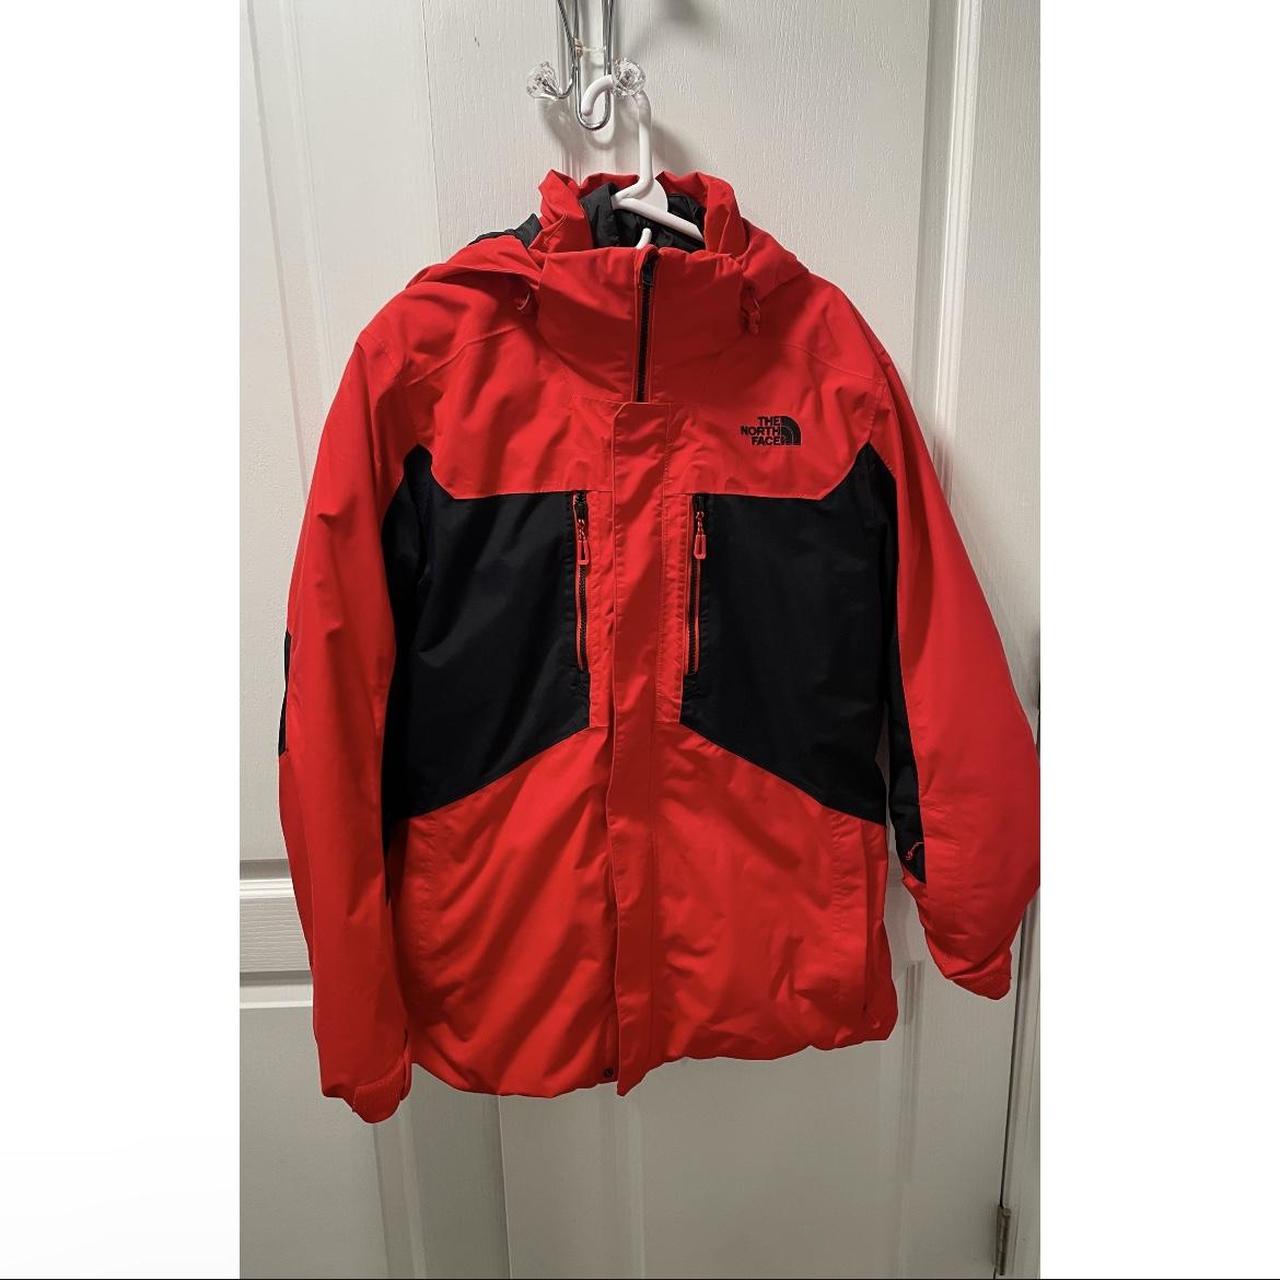 The North Face - Red Jacket - Ski and Snowboard... - Depop